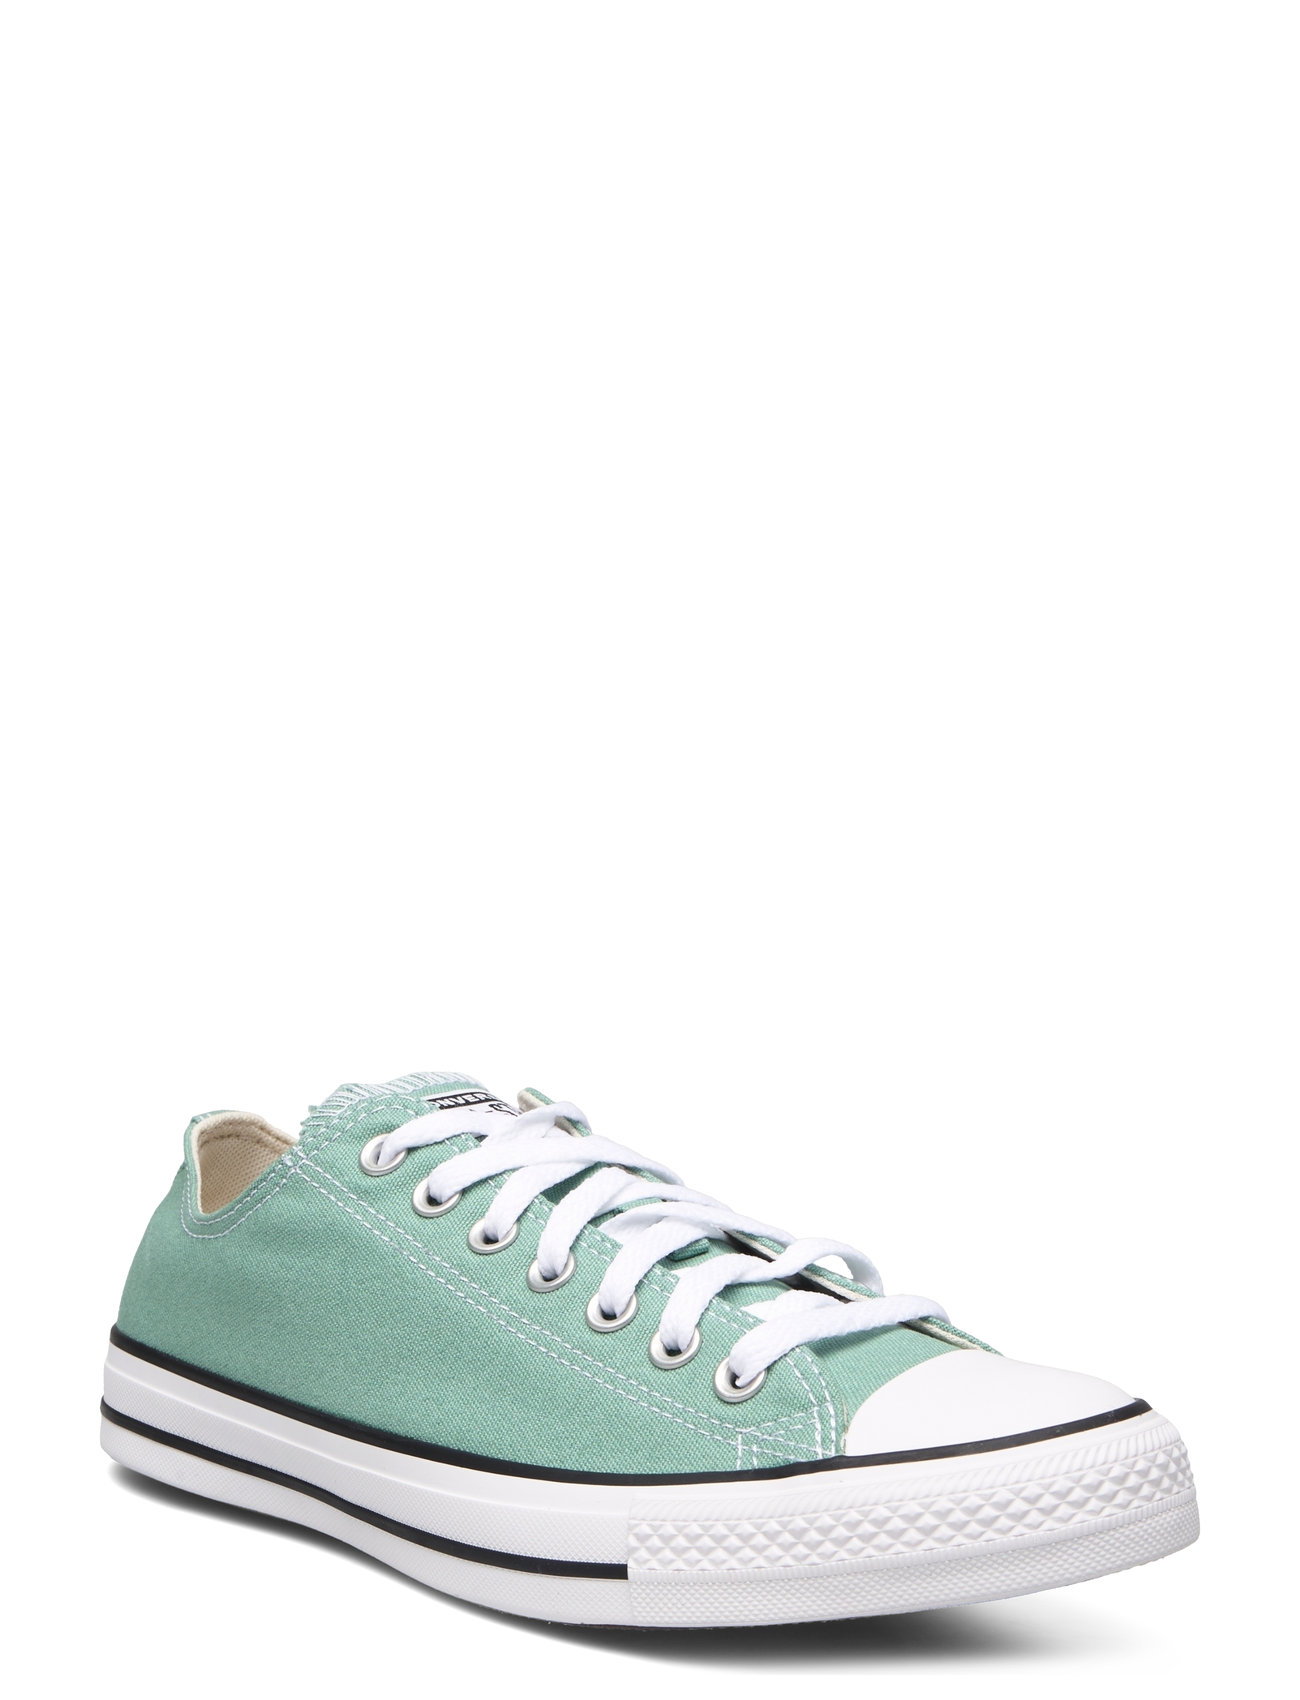 Chuck Taylor All Star Sport Sneakers Low-top Sneakers Green Converse